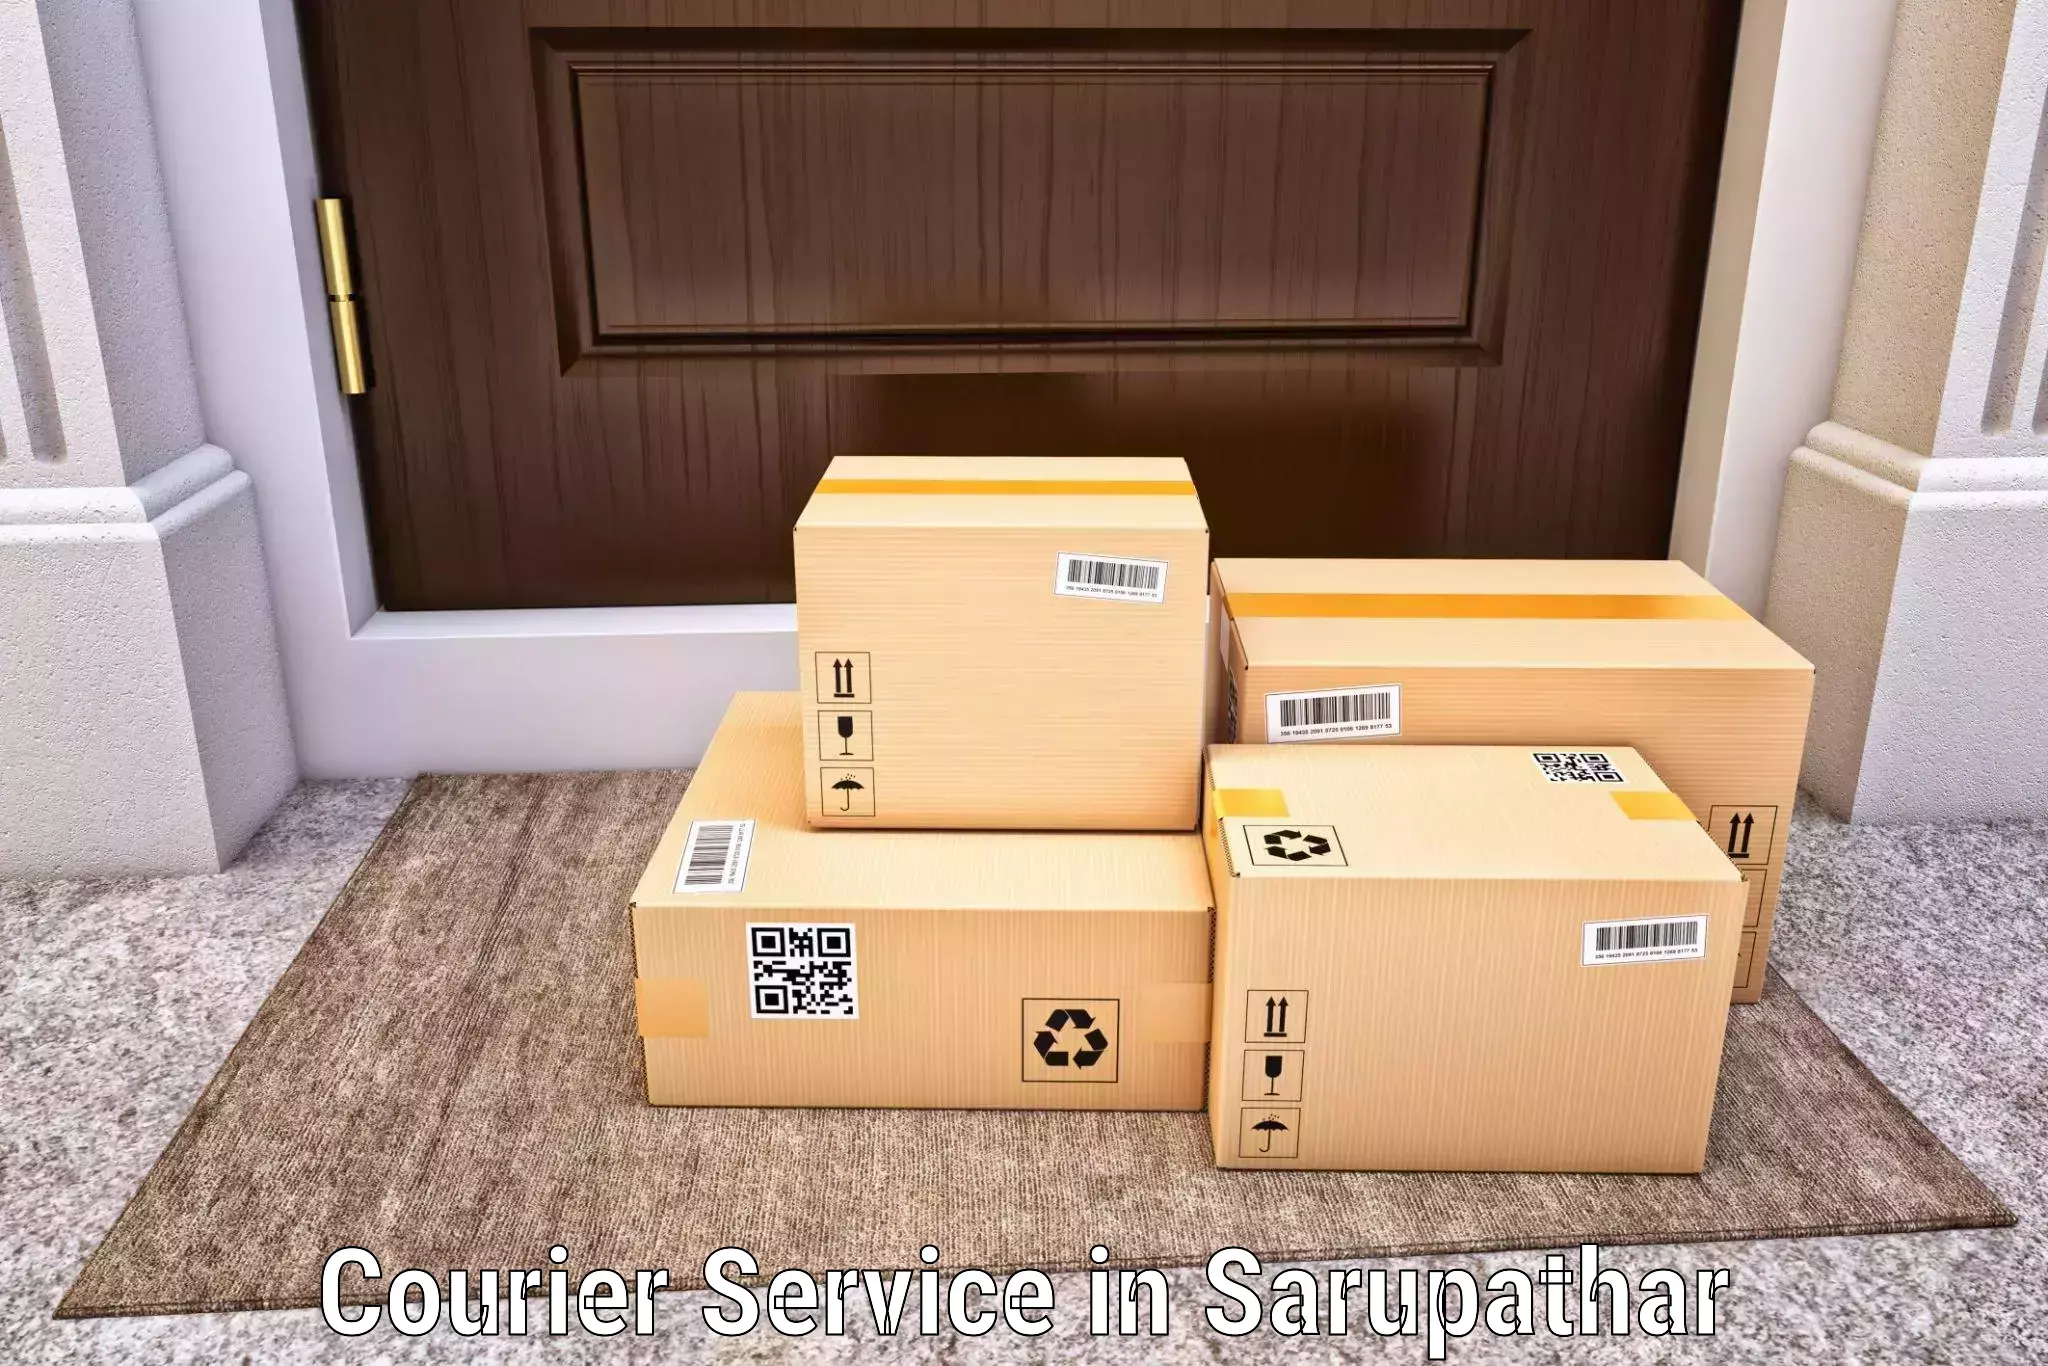 Tech-enabled shipping in Sarupathar